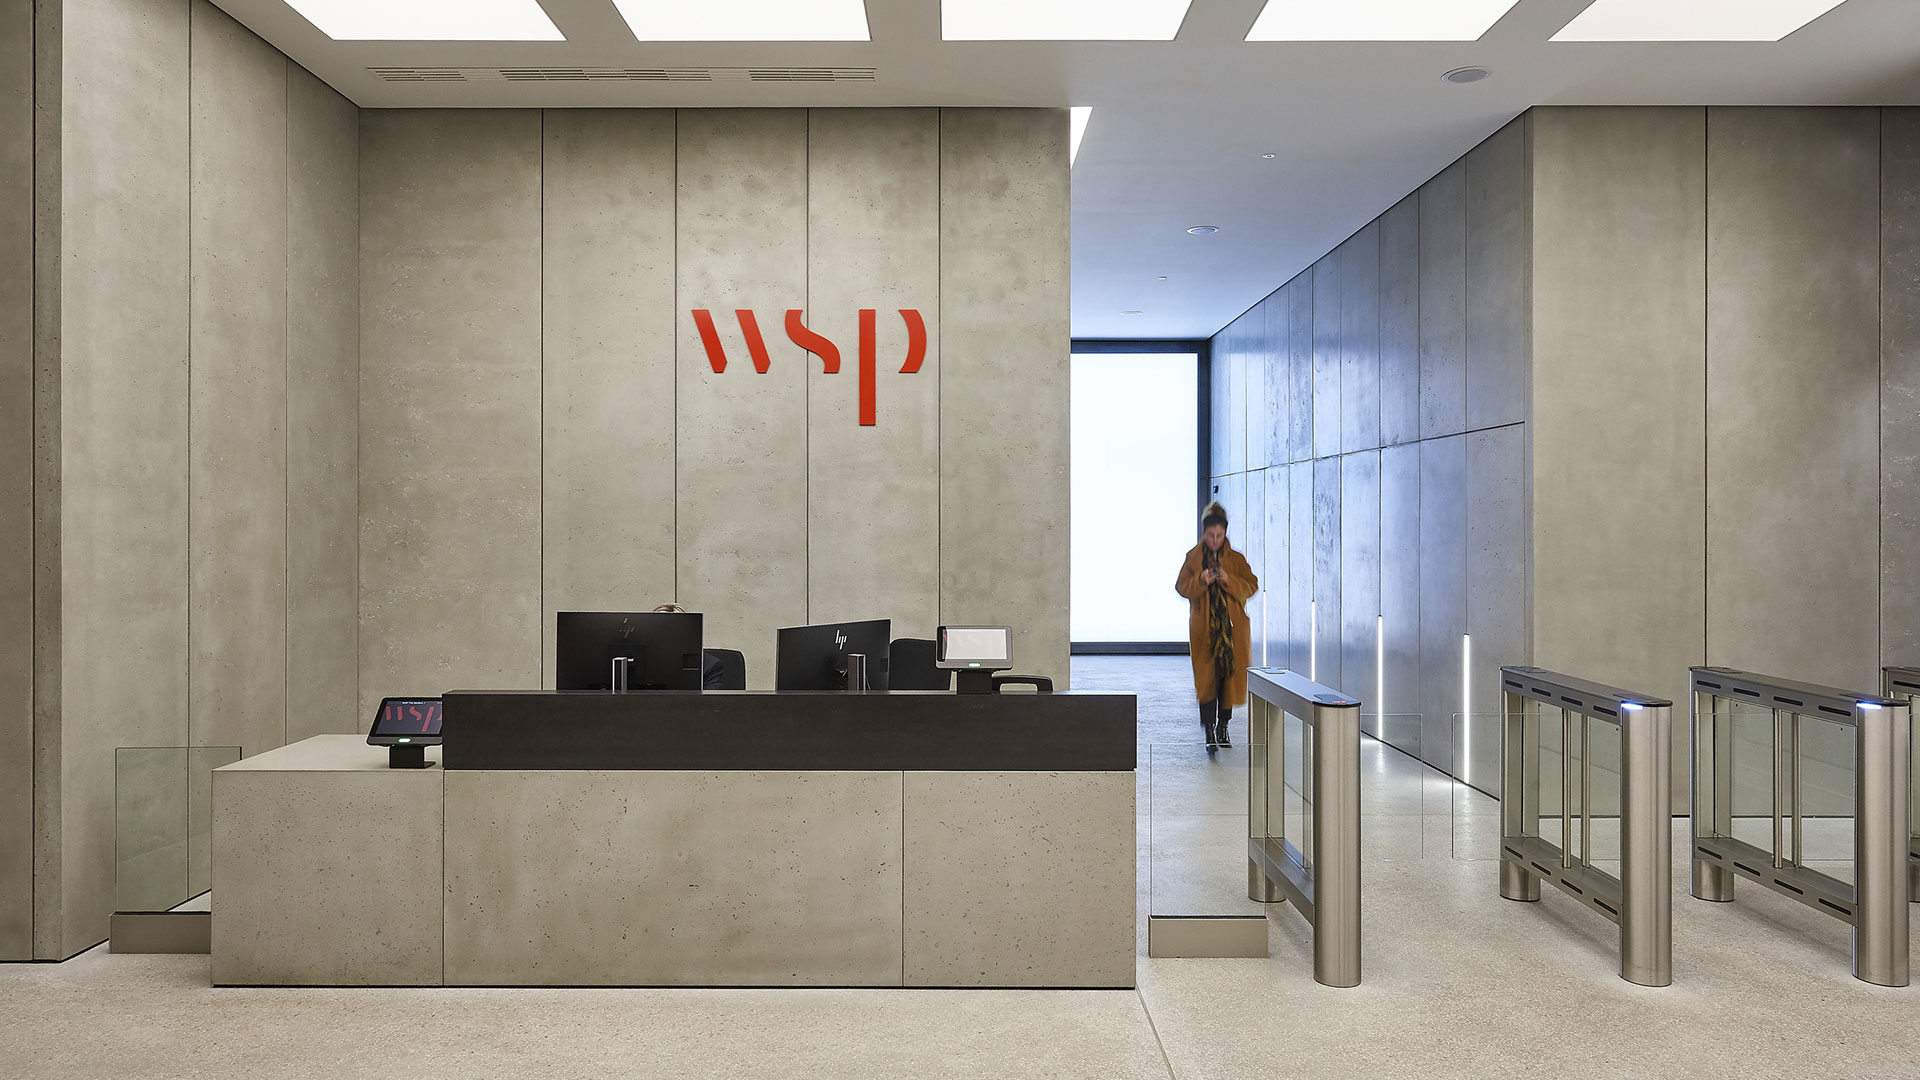 WSP adopts Causeway Flow for drainage design across its global offices